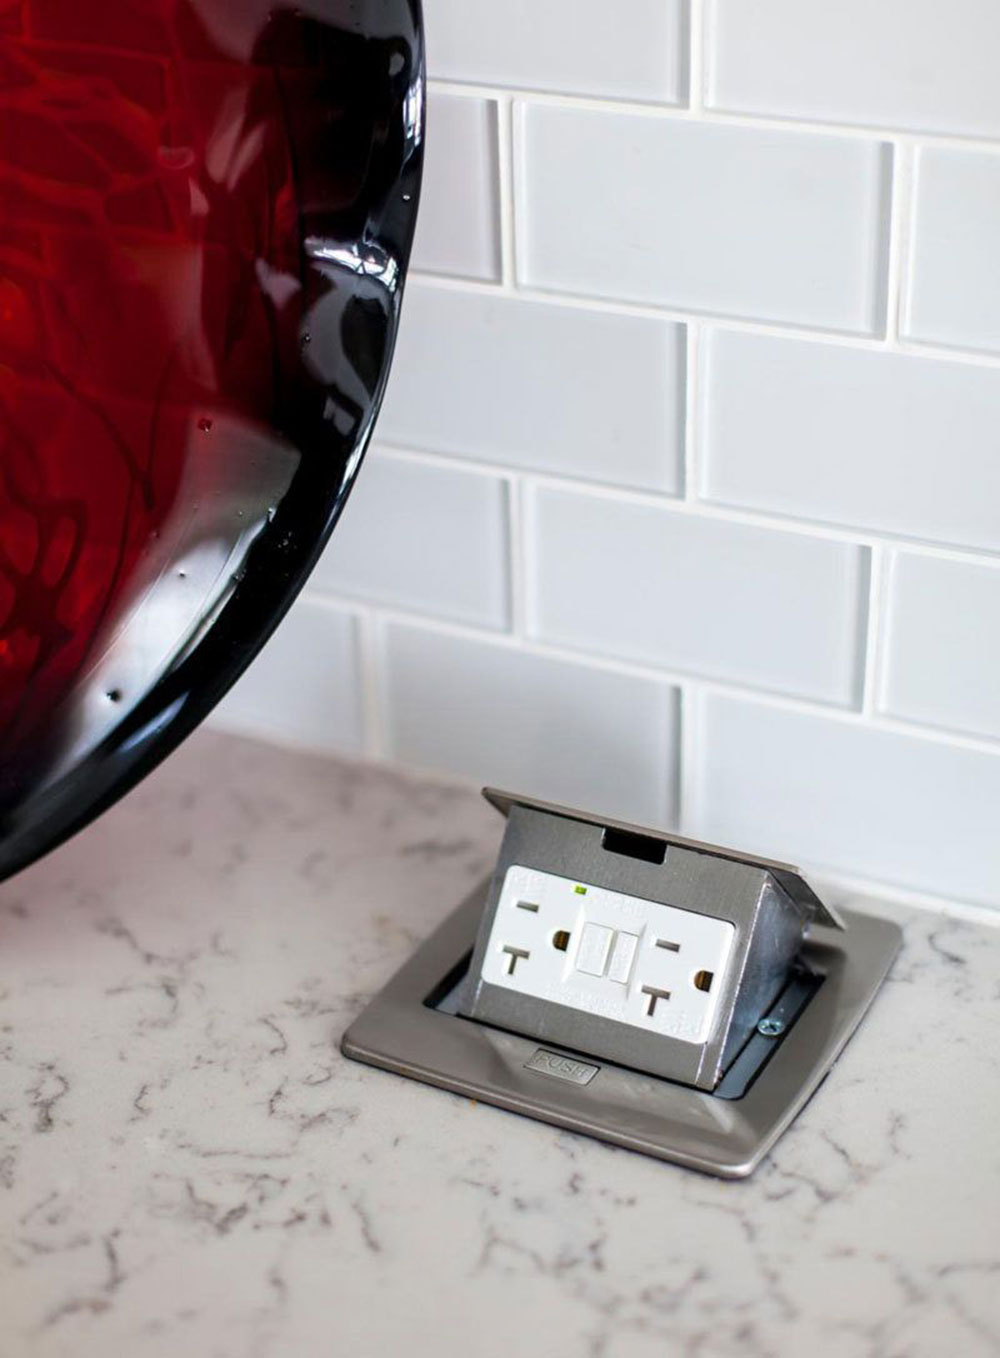 Install-Some-Pop-Up-Outlets How to Hide Outlets in Kitchen Backsplash Like a Pro